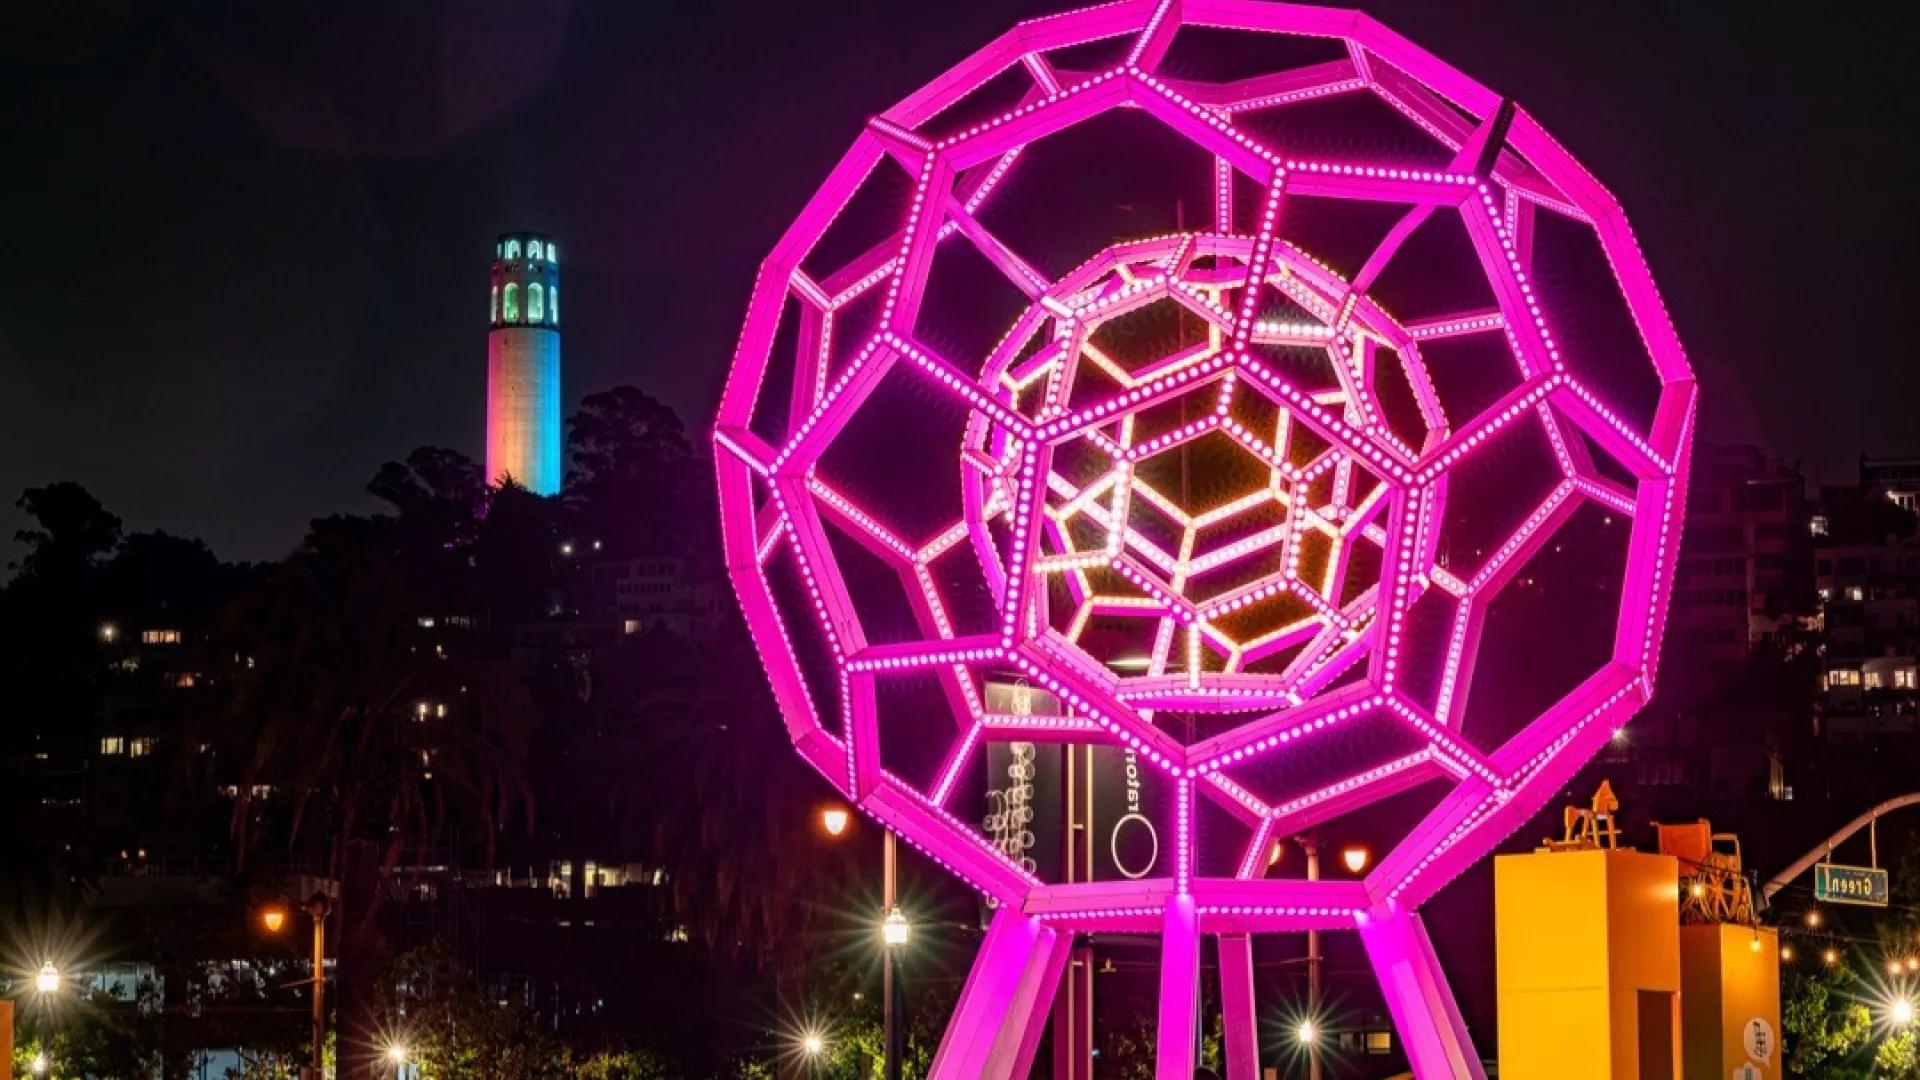 Buckyball glows in the foreground while Coit Tower shines in the distance.